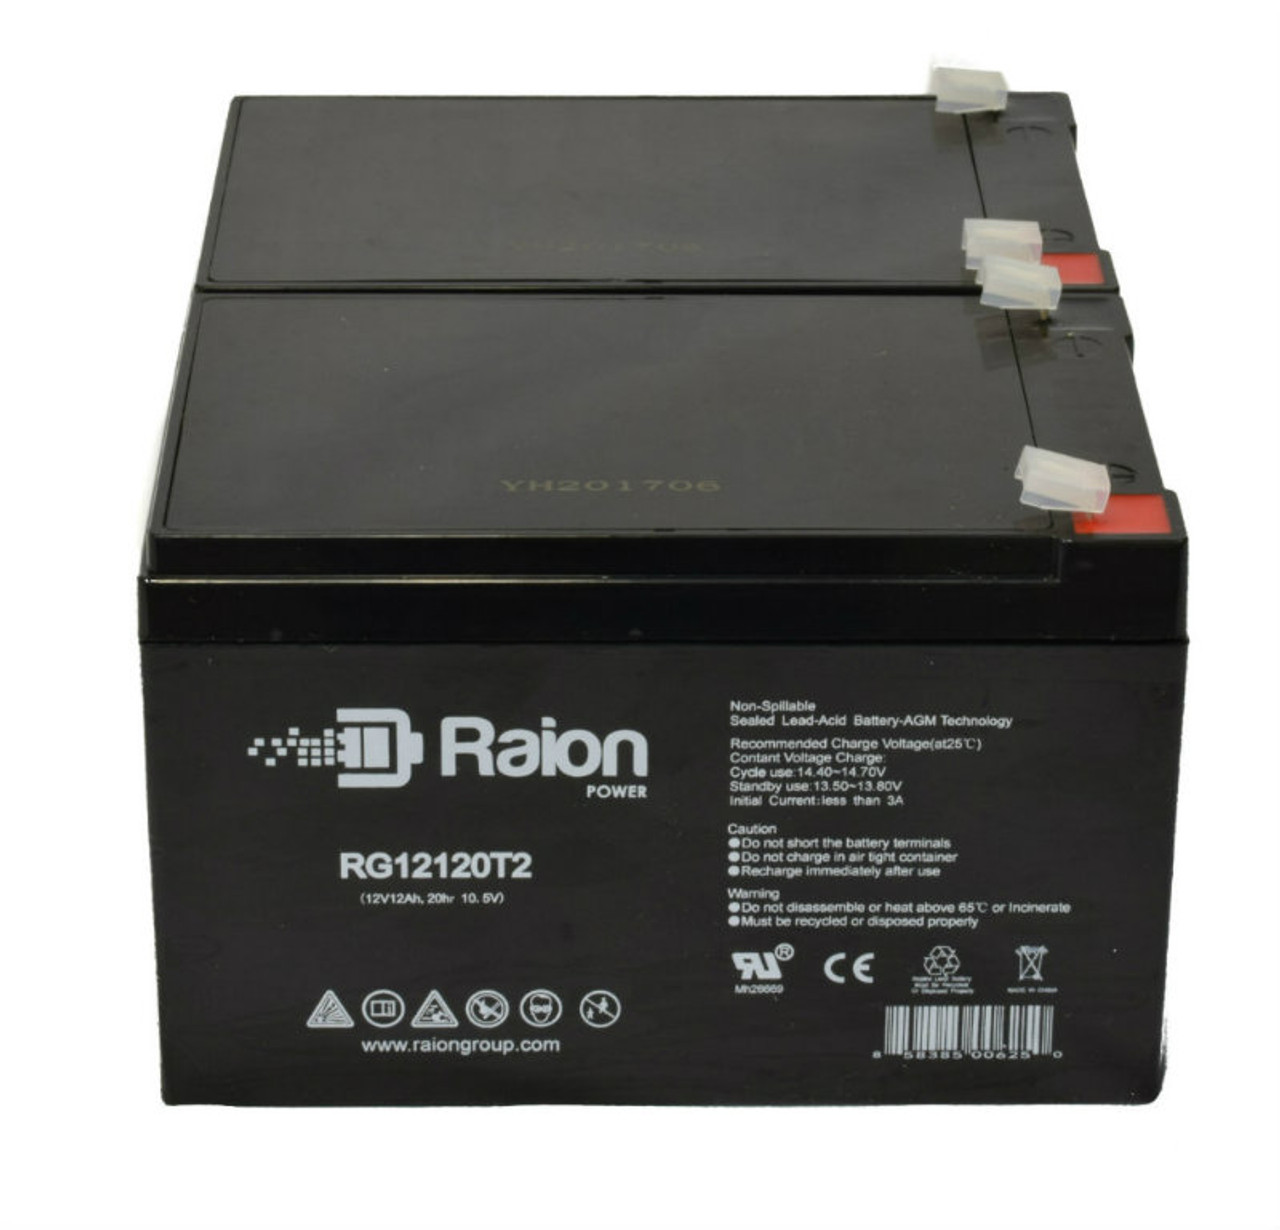 Raion Power 12V 12Ah Non-Spillable Compatible Replacement Battery for FirstPower FP12120L - (2 Pack)